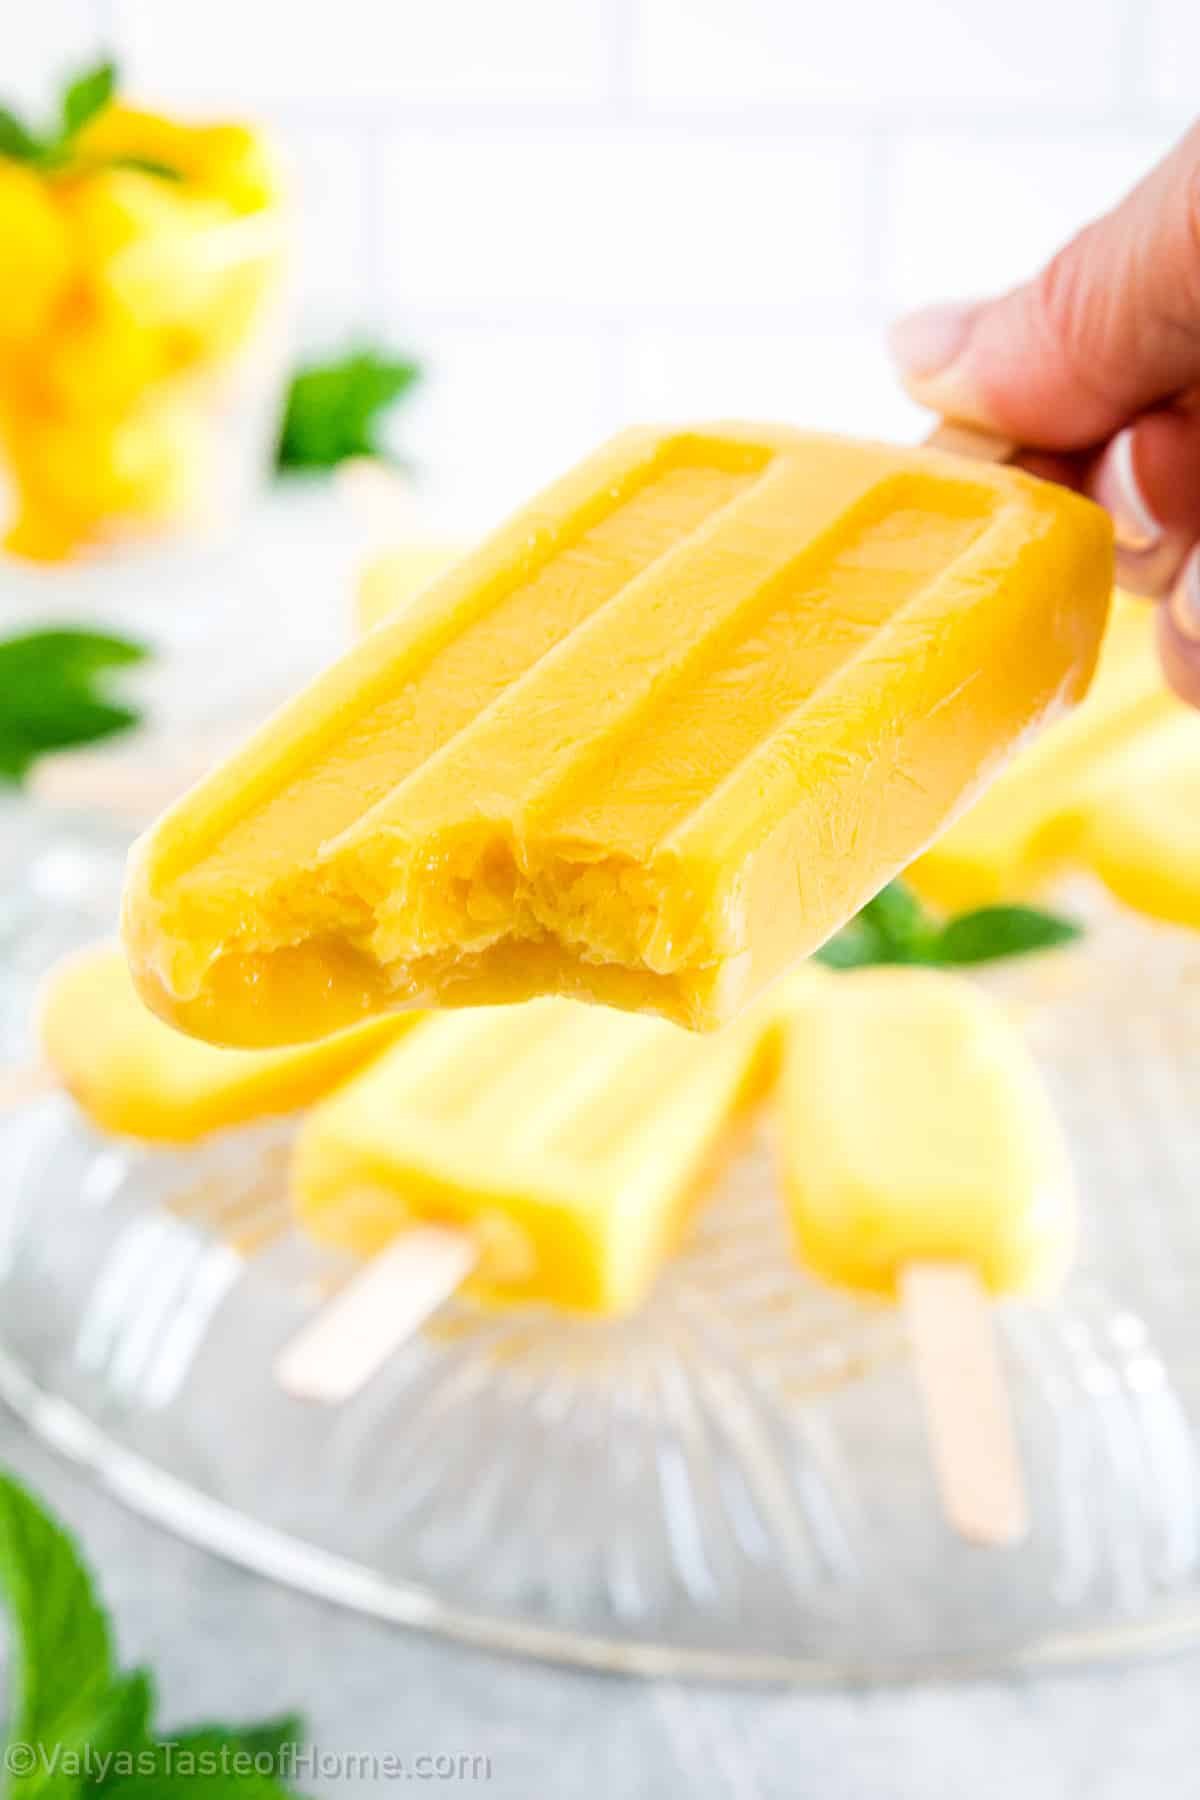 Mango popsicles are frozen treats made with ingredients like frozen mangoes, a sweetener like sugar, and water or other liquids. 